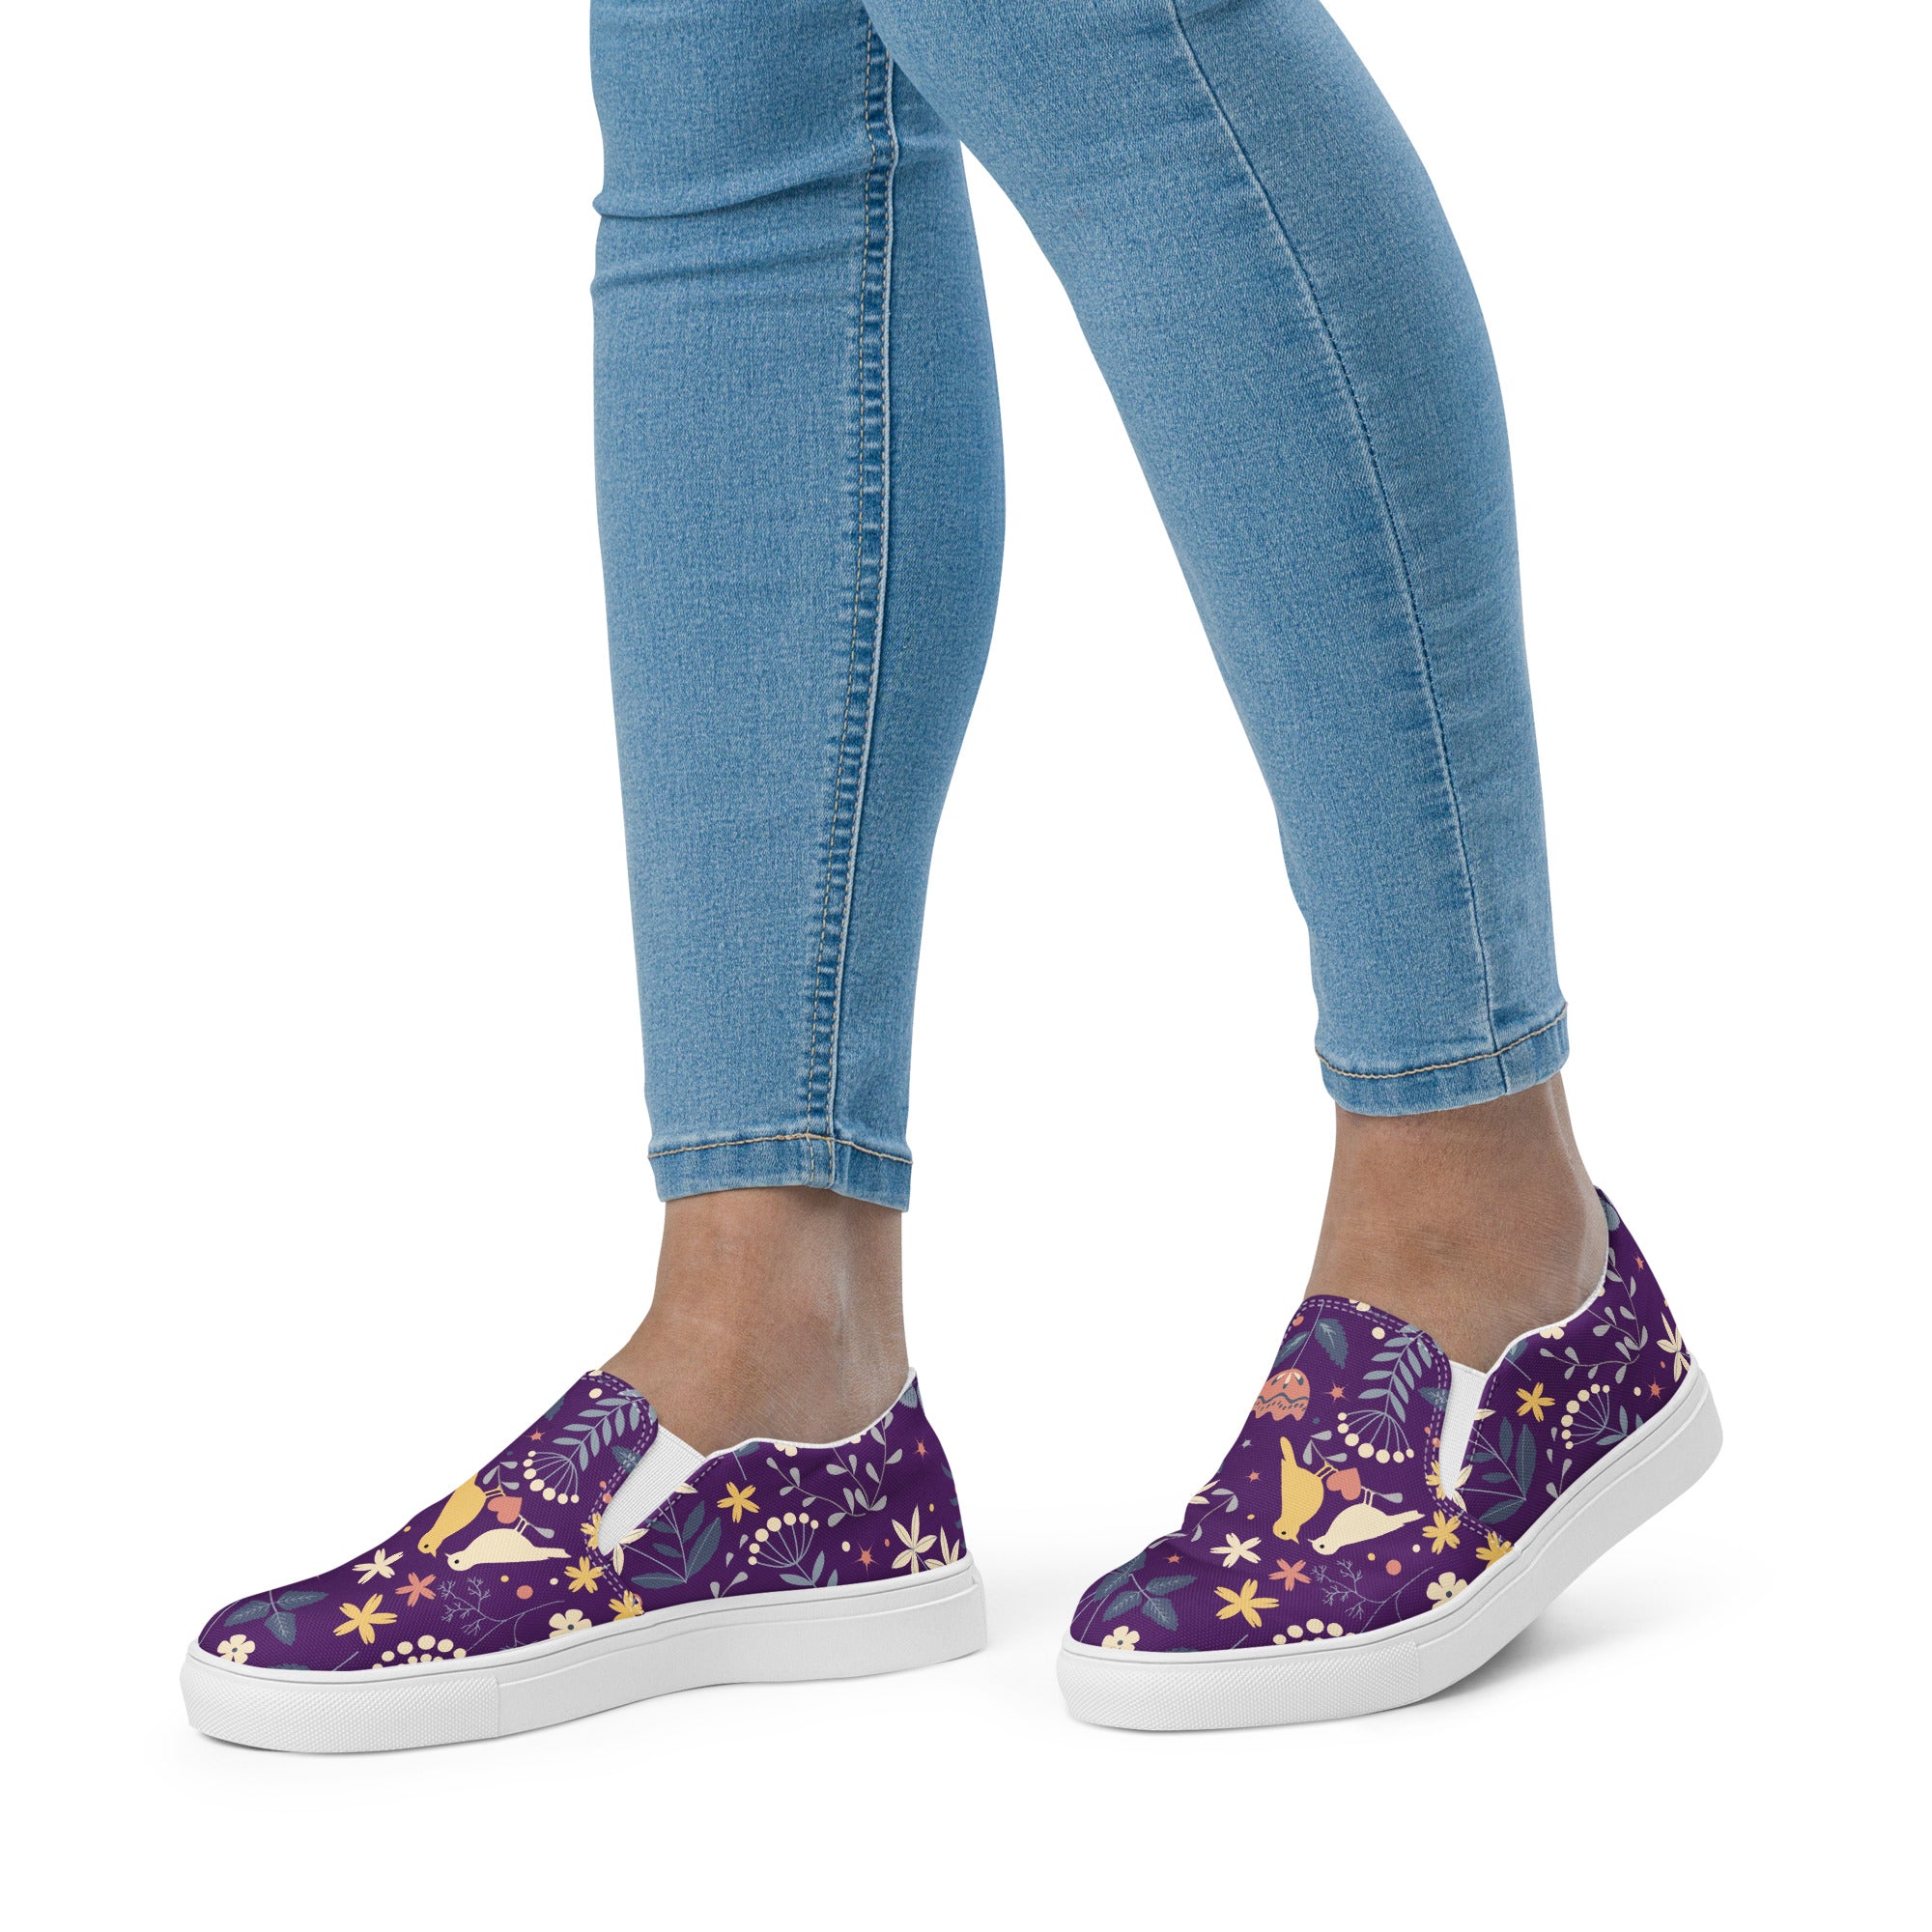 Women’s slip-on canvas shoes - SELFTRITSS